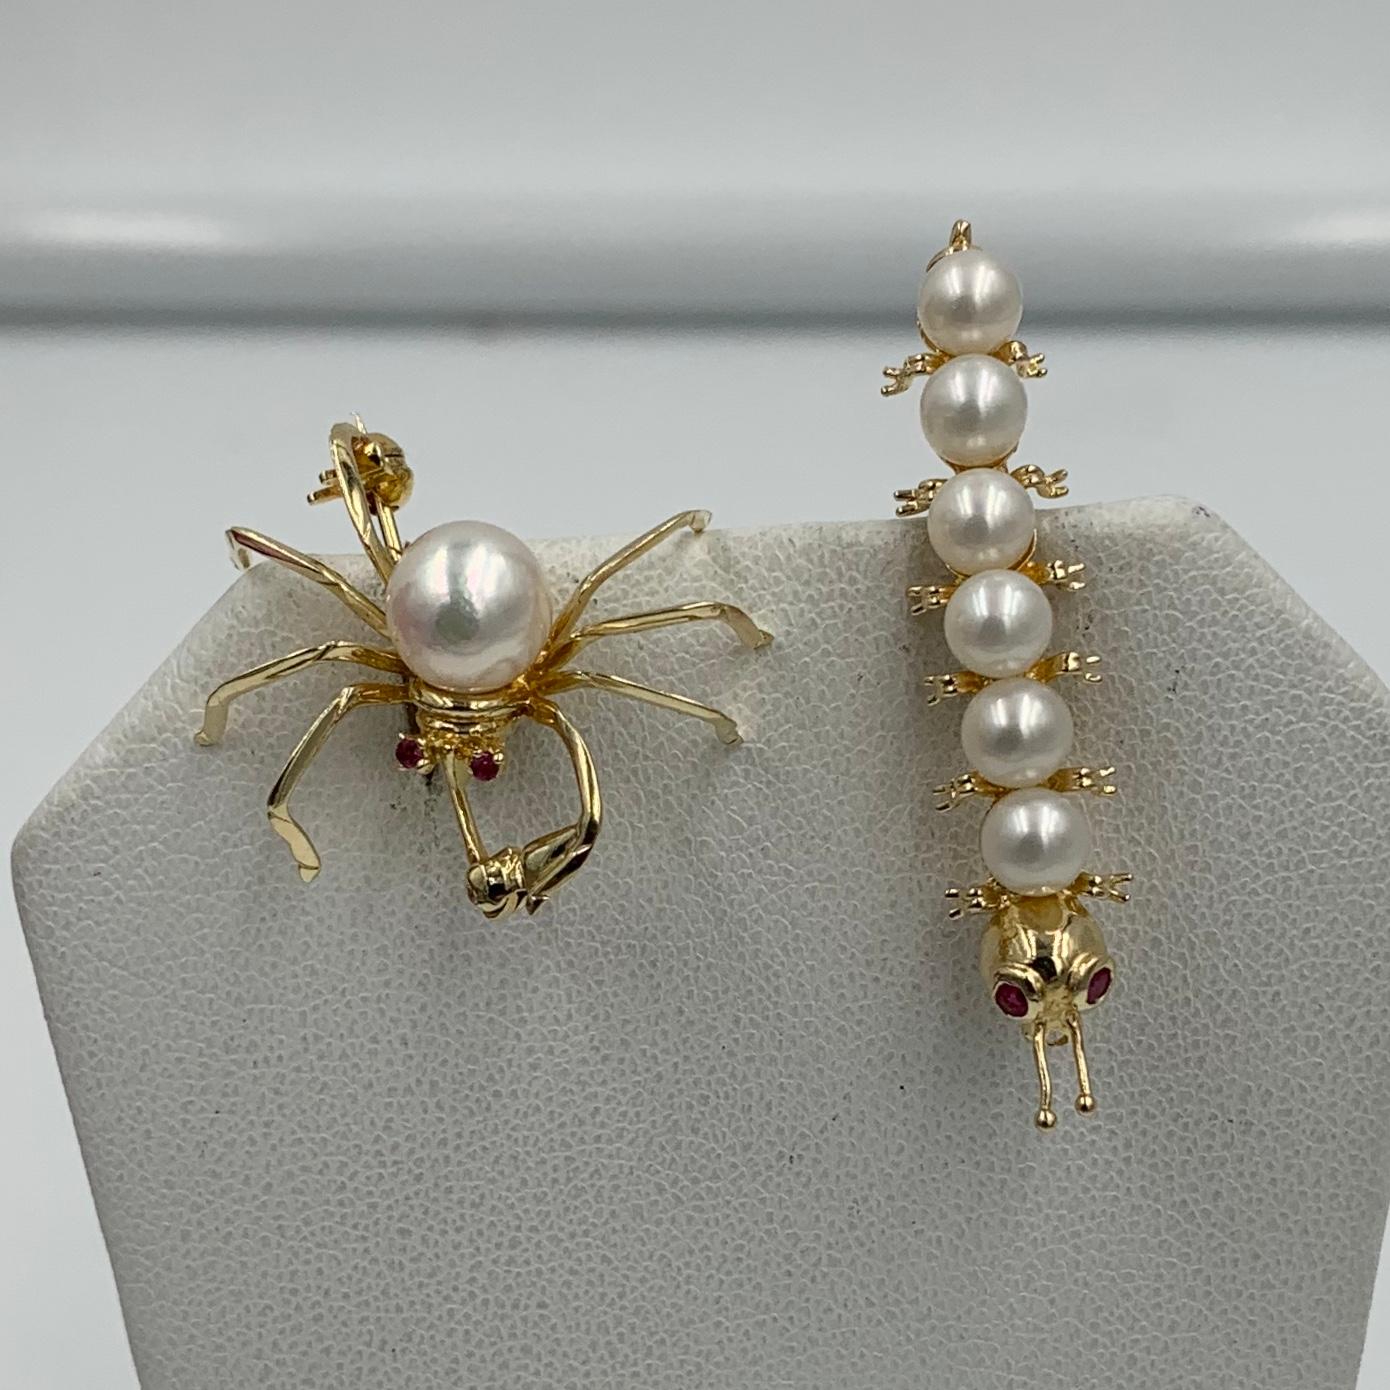 A wonderful pair of Pearl and Ruby Insect Brooch Pins in the form of a gorgeous Spider and a delightful Caterpillar in 14 Karat Gold.  The magnificent Spider has an 8mm silvery white Pearl for its body and sparkling Ruby Eyes.  The long legs are 14